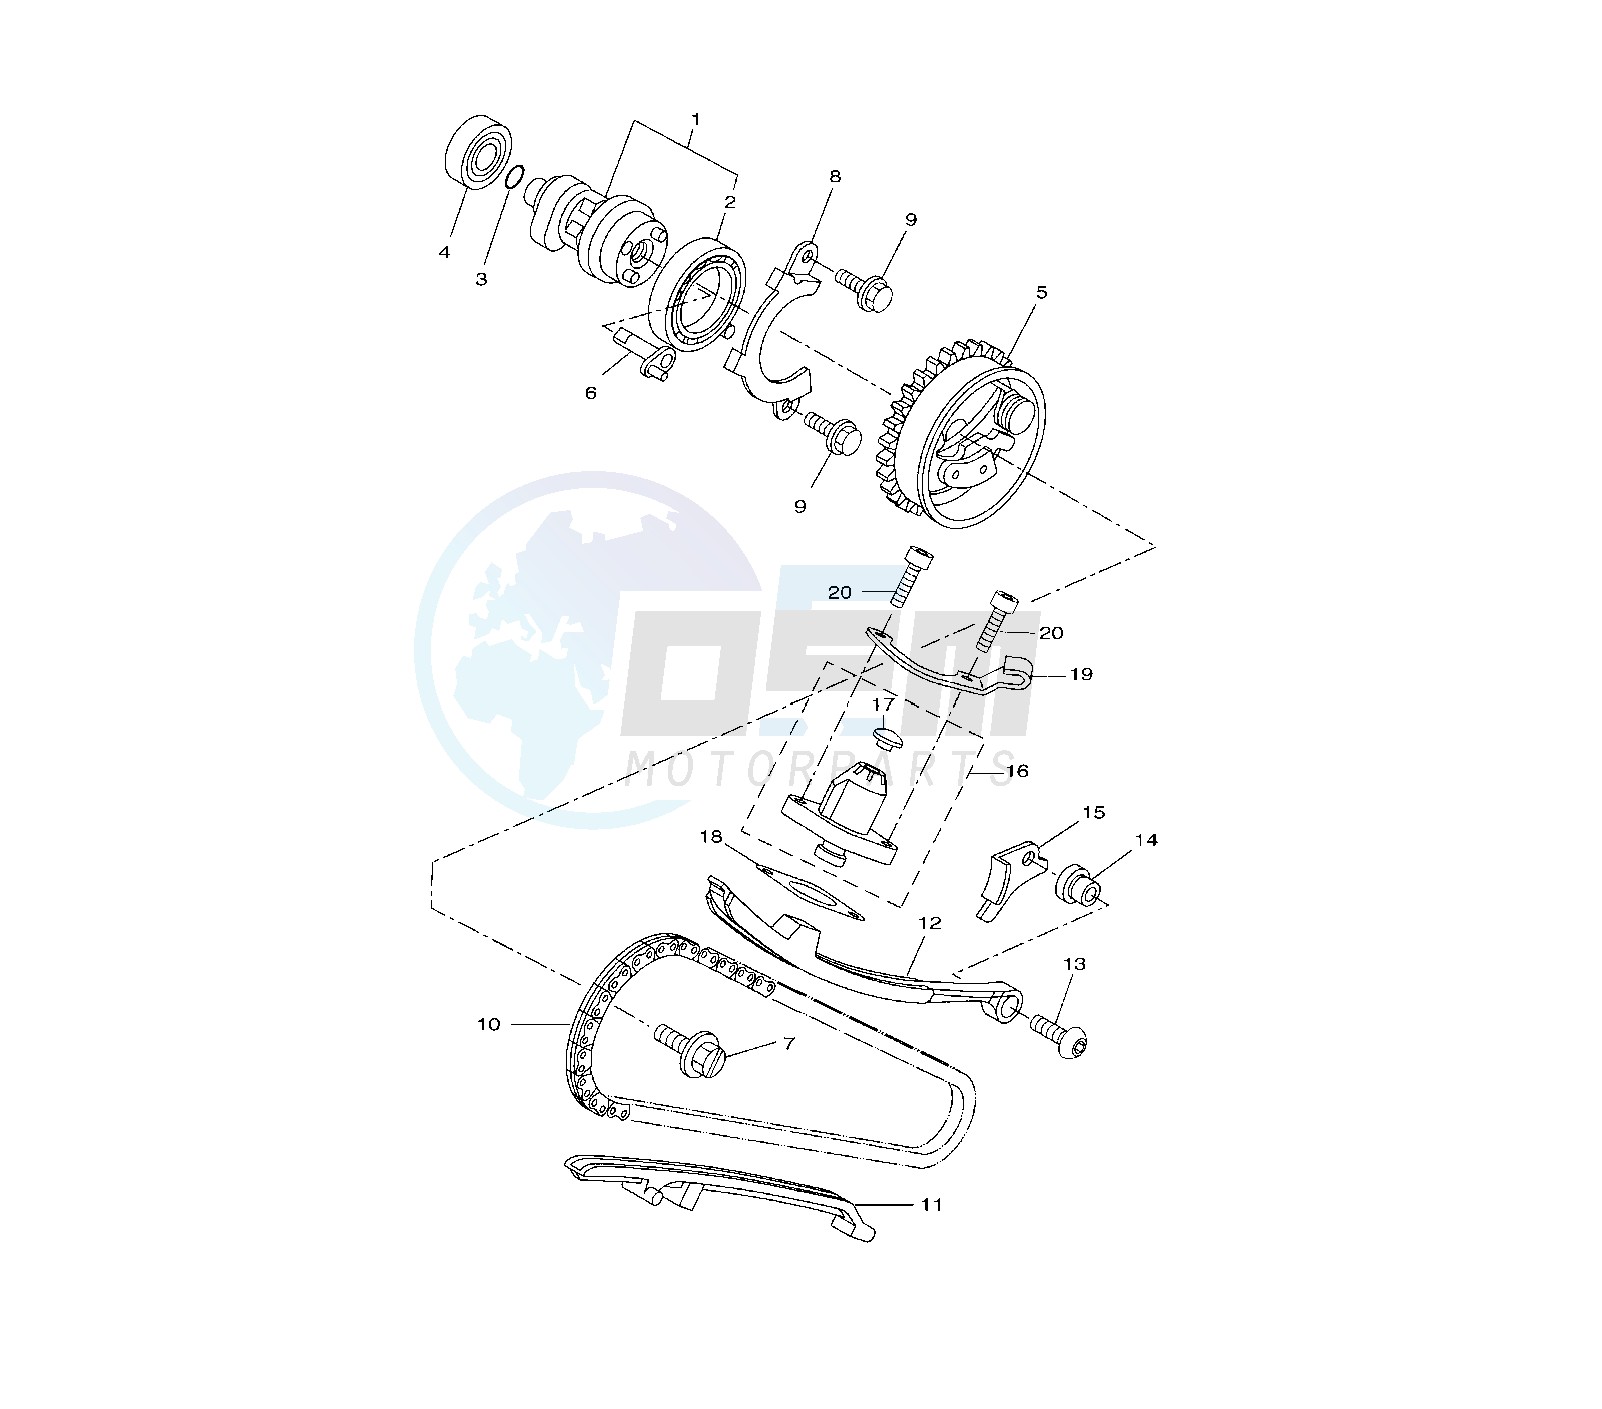 CAMSHAFT AND TIMING CHAIN blueprint